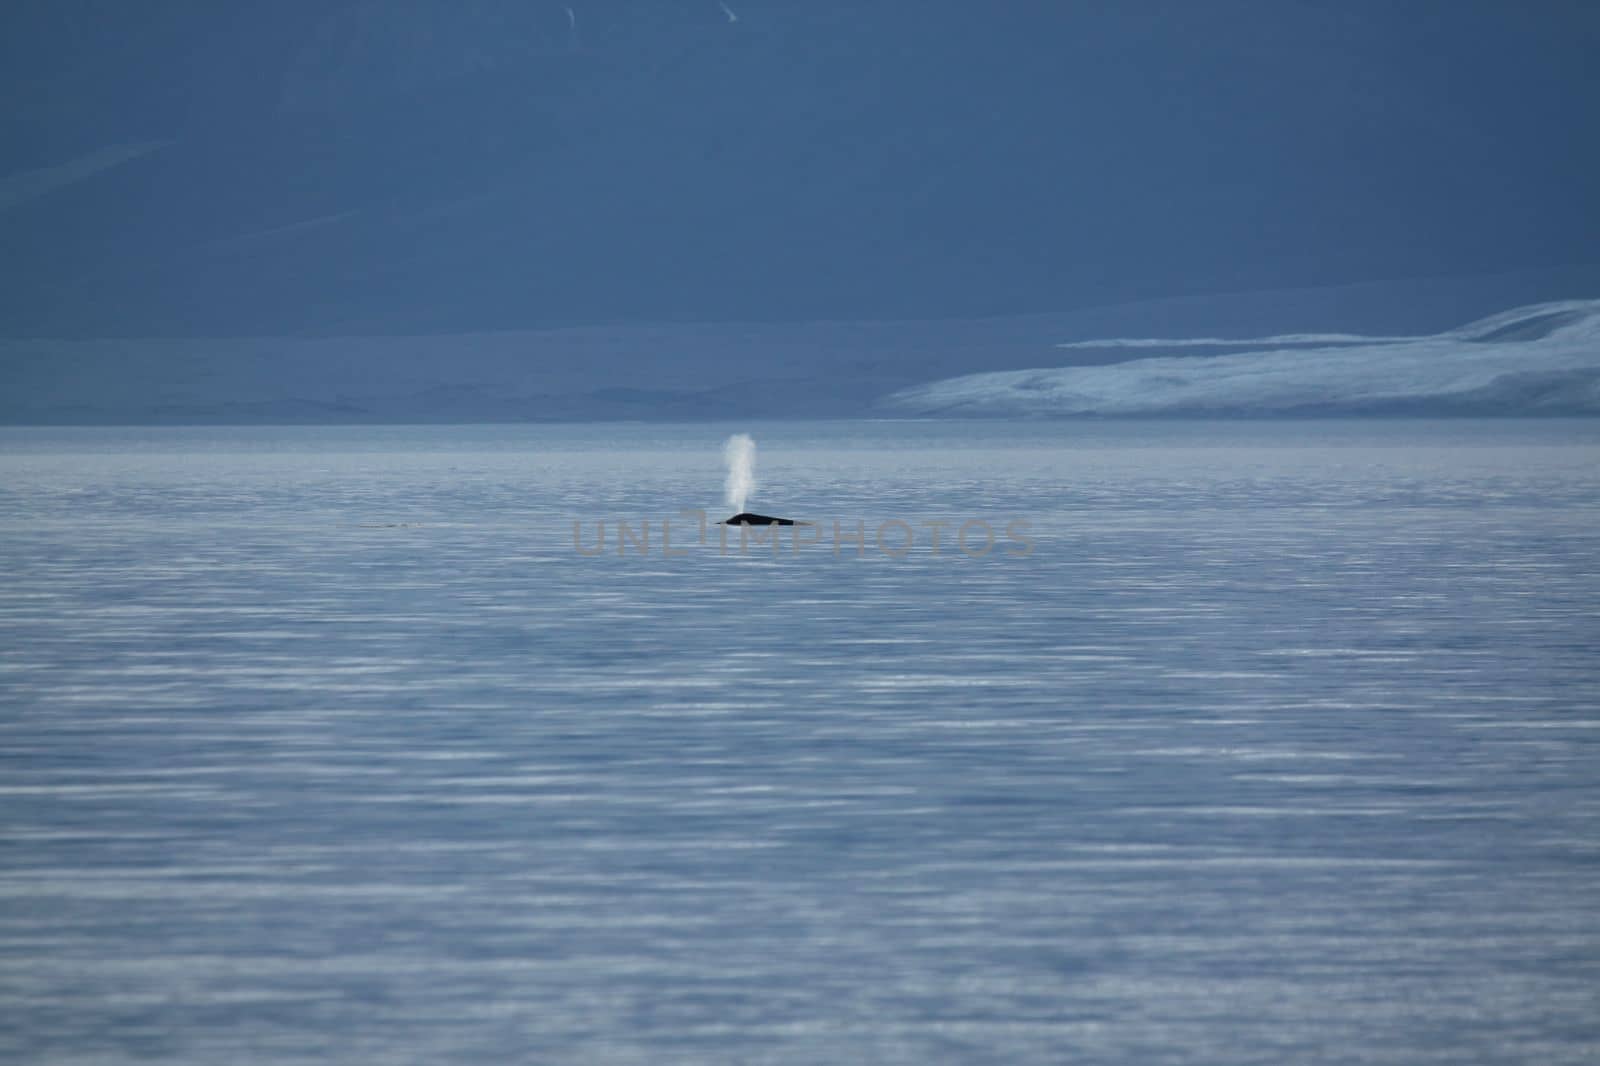 Whales blowing near in Pond Inlet, Nunavut, Canada